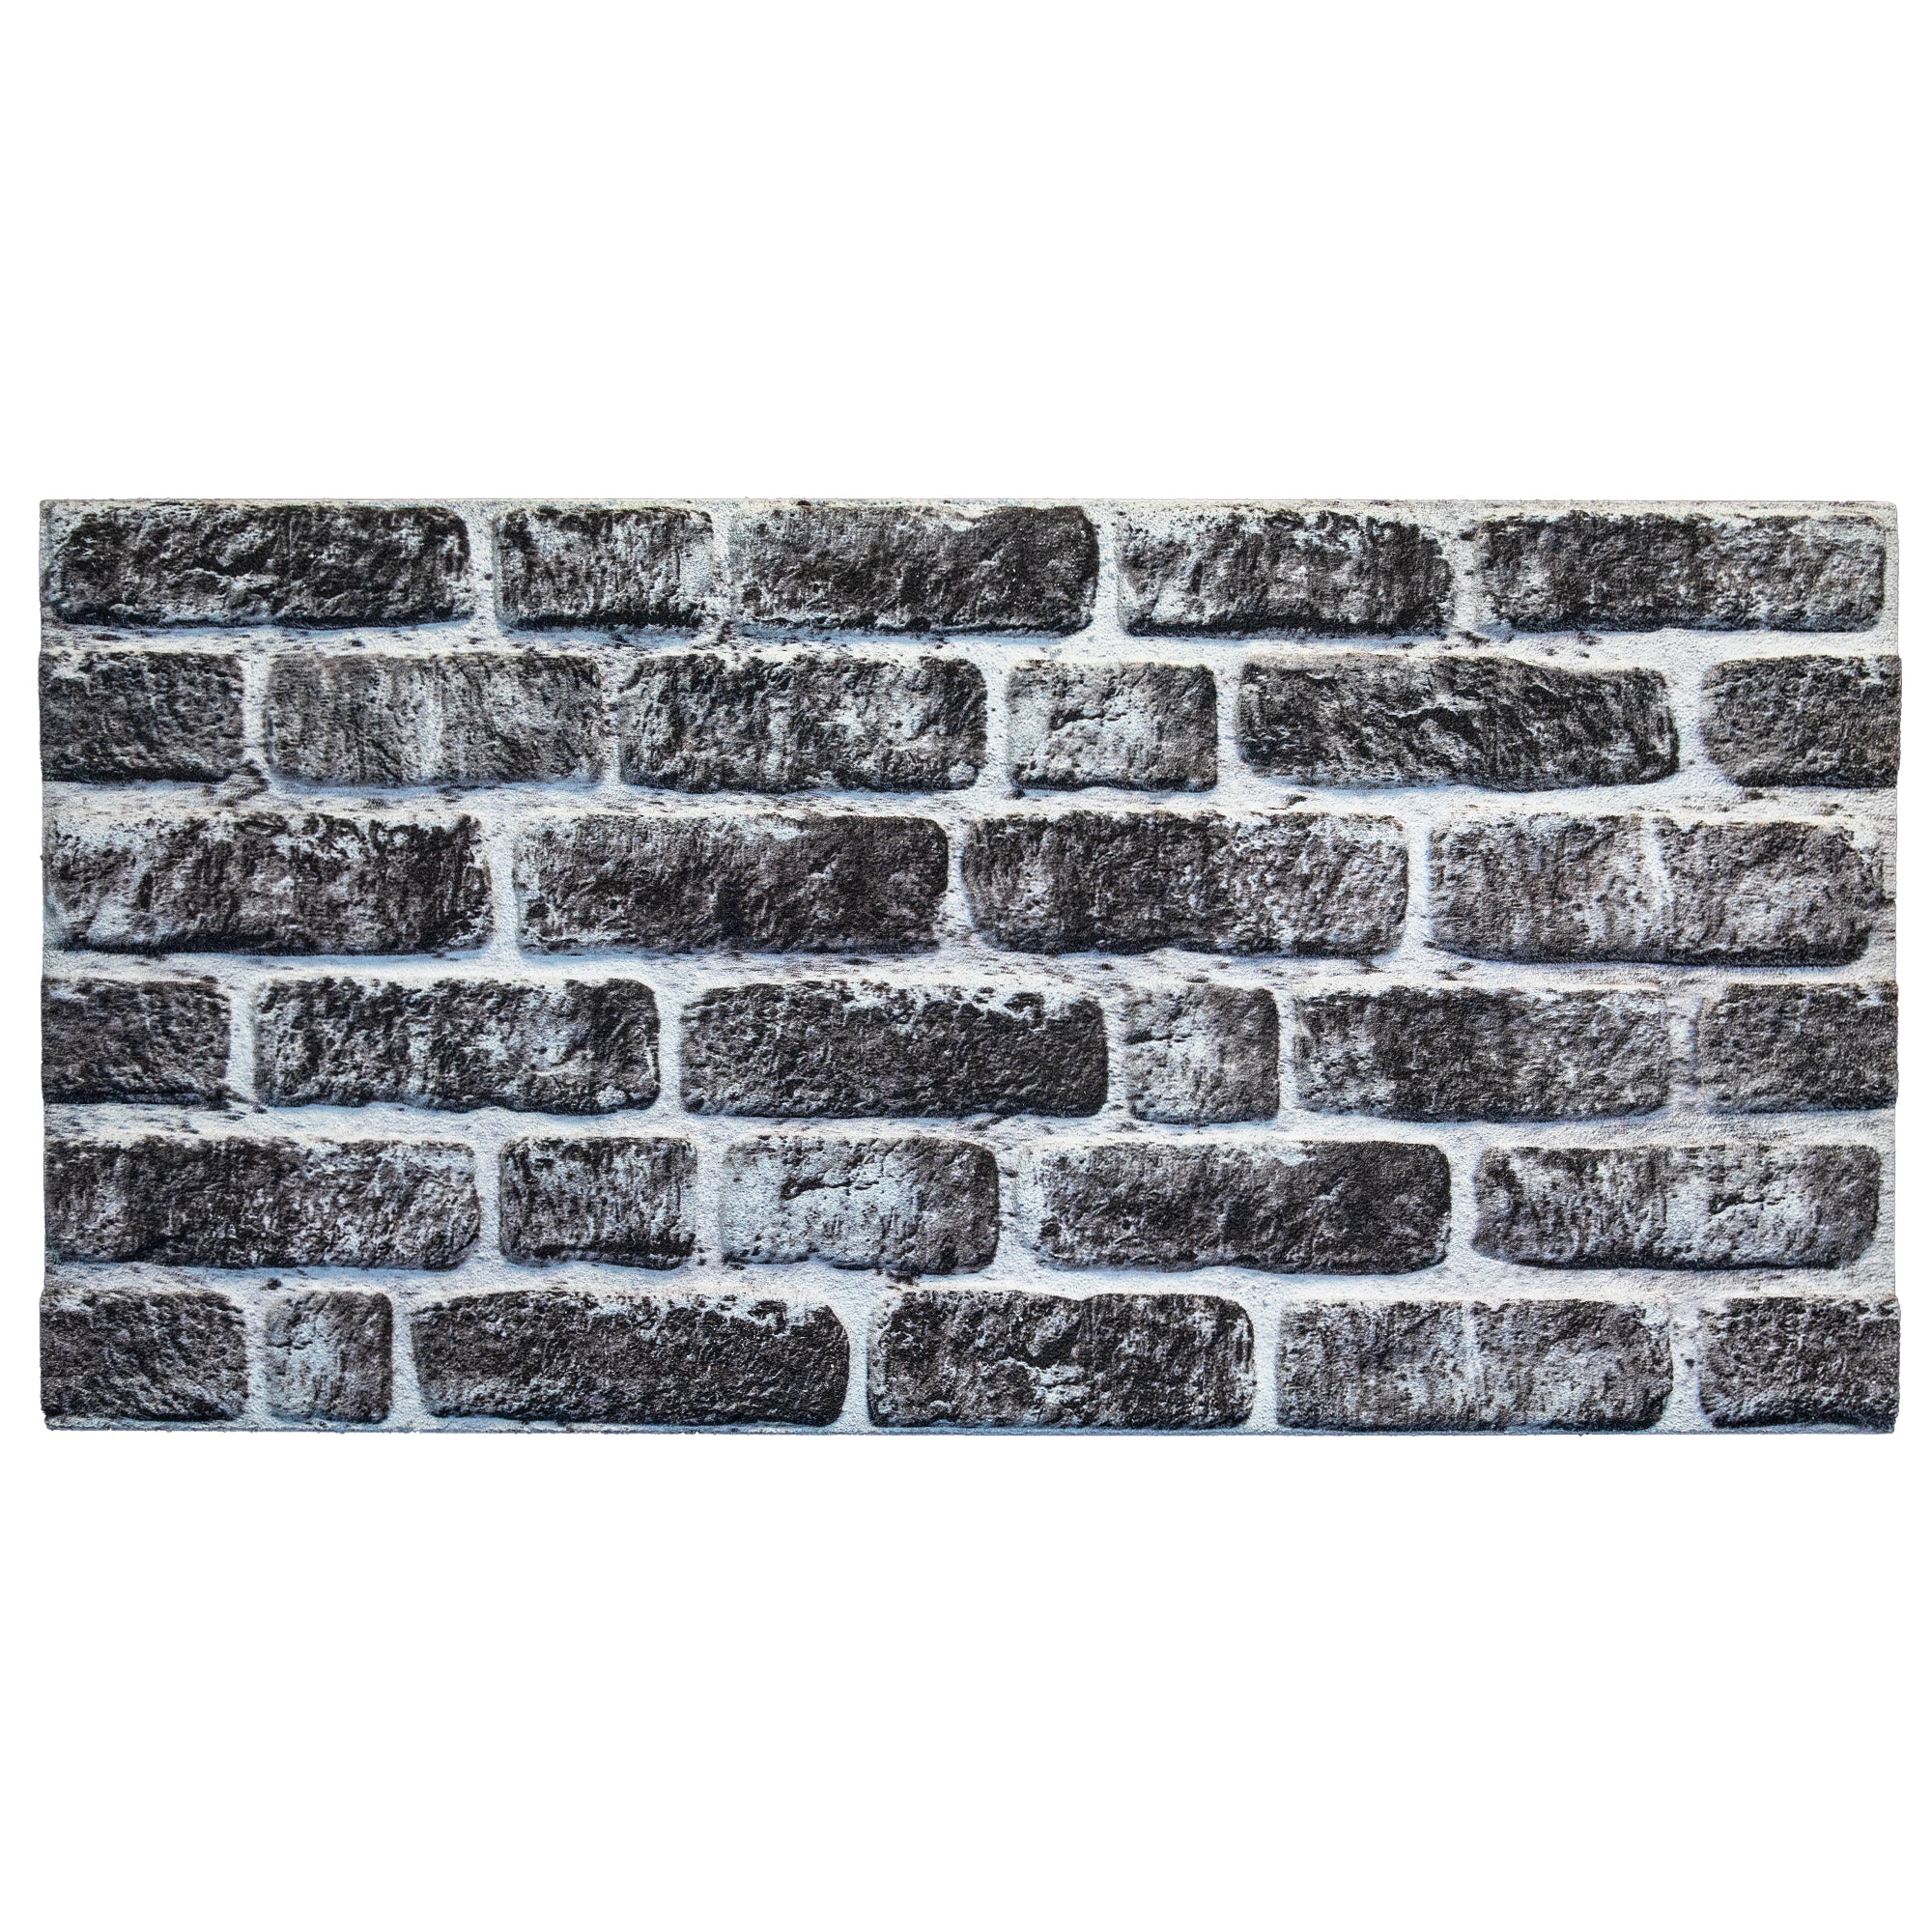 Old Town L-1703 EPS Insulation Wall Panels - izodekor3D Wall PanelL-1703868256047109Old Town L-1703 EPS Insulation Wall Panels